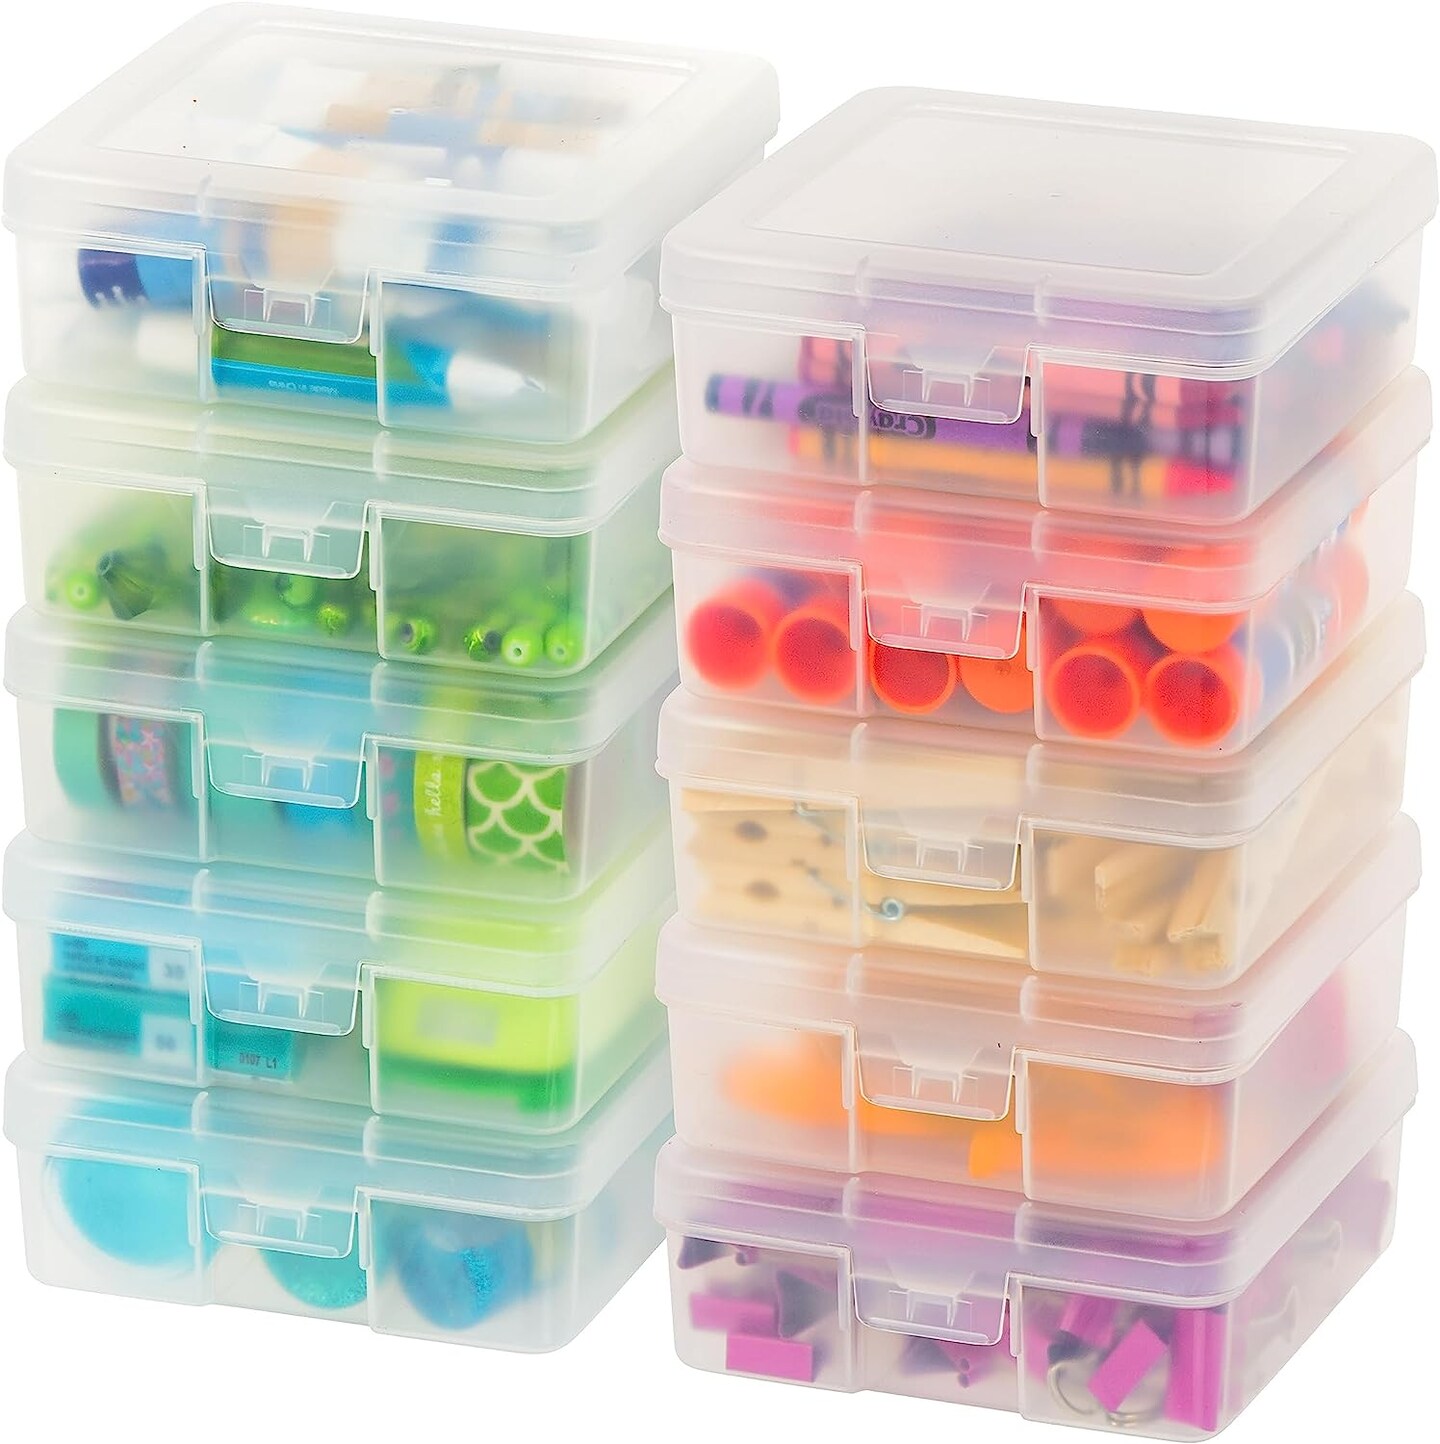 IRIS USA 10 Pack Small/Medium/Large Plastic Hobby Art Craft Supply  Organizer Storage Containers with Latching Lid, for Pencil, Lego, Crayon,  Ribbons, Tape, Beads, Sticker, Yarn, Stackable, Clear